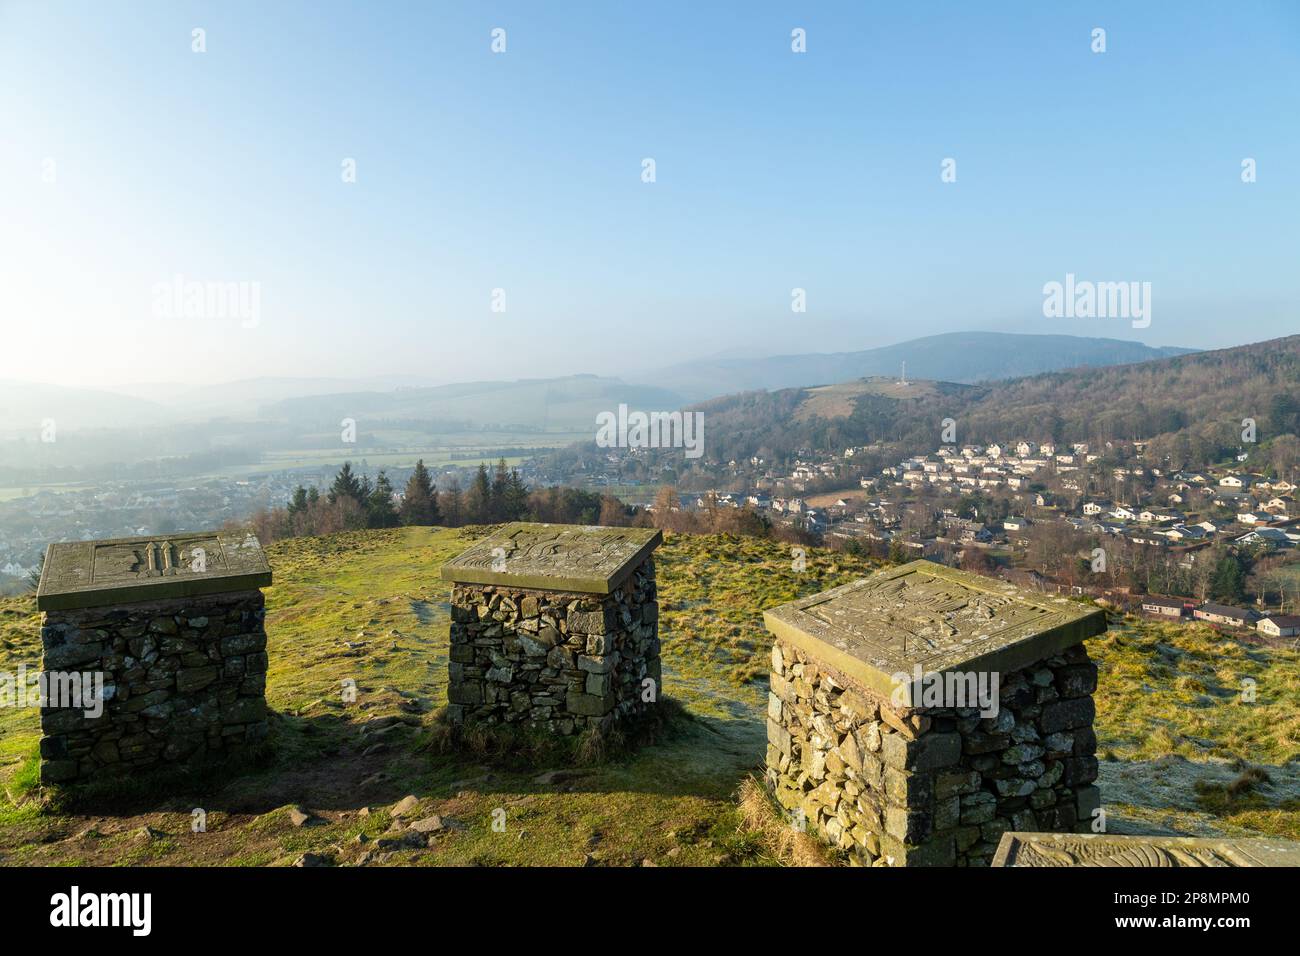 Pirn fort and iron age settlement above Innerleithen, Scotland Stock Photo